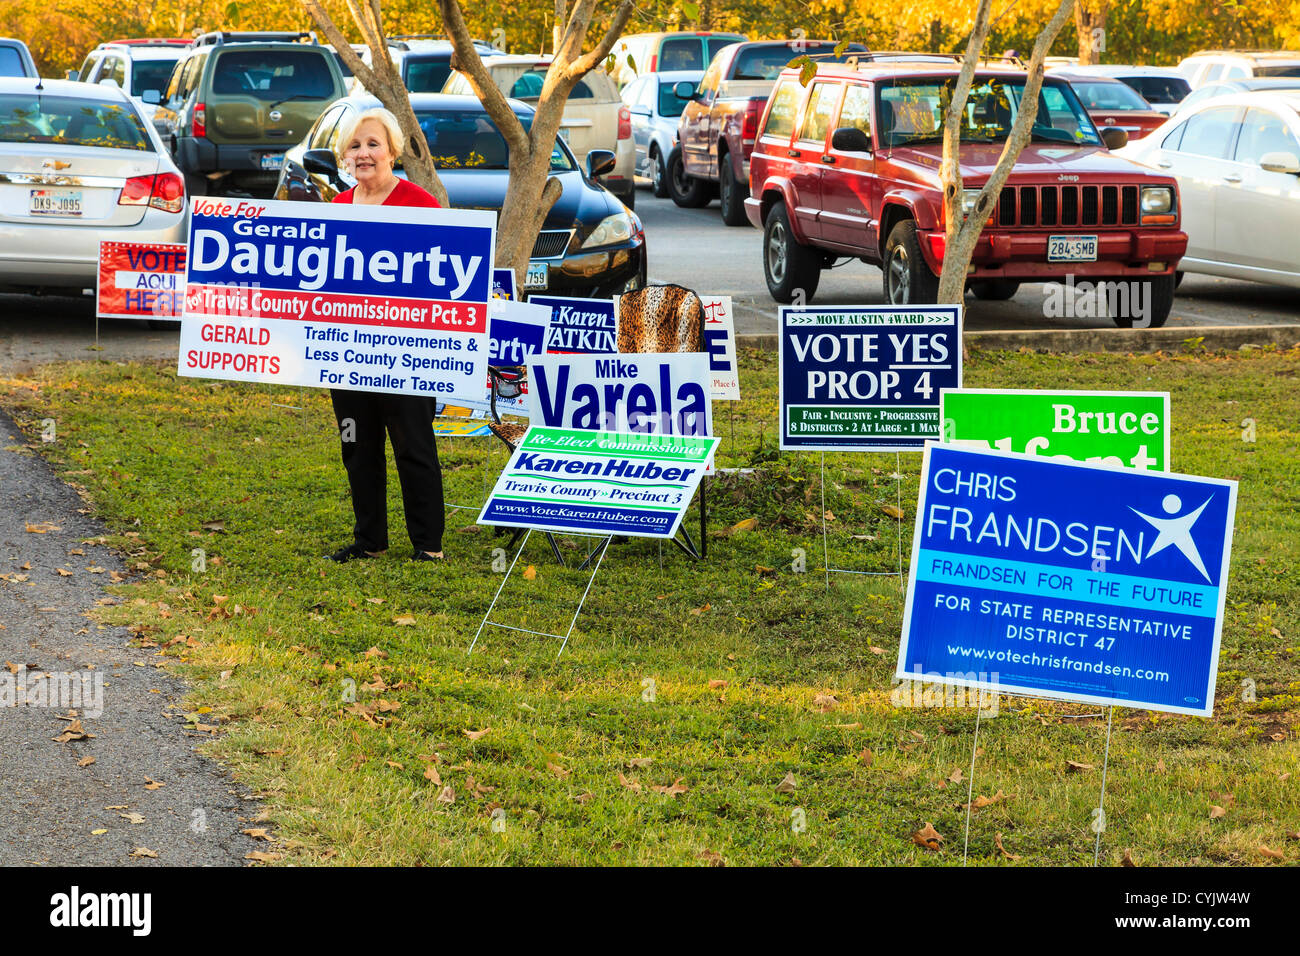 Judy Pittsford campaigns for the county commissioner Pct 3 outside a polling station as voting opens. Keeping 100ft distance from the polls. Manchaca Methodist Church south Austin, TX. More than a presidential election, local, state wide votes on the ballot sheet. Stock Photo